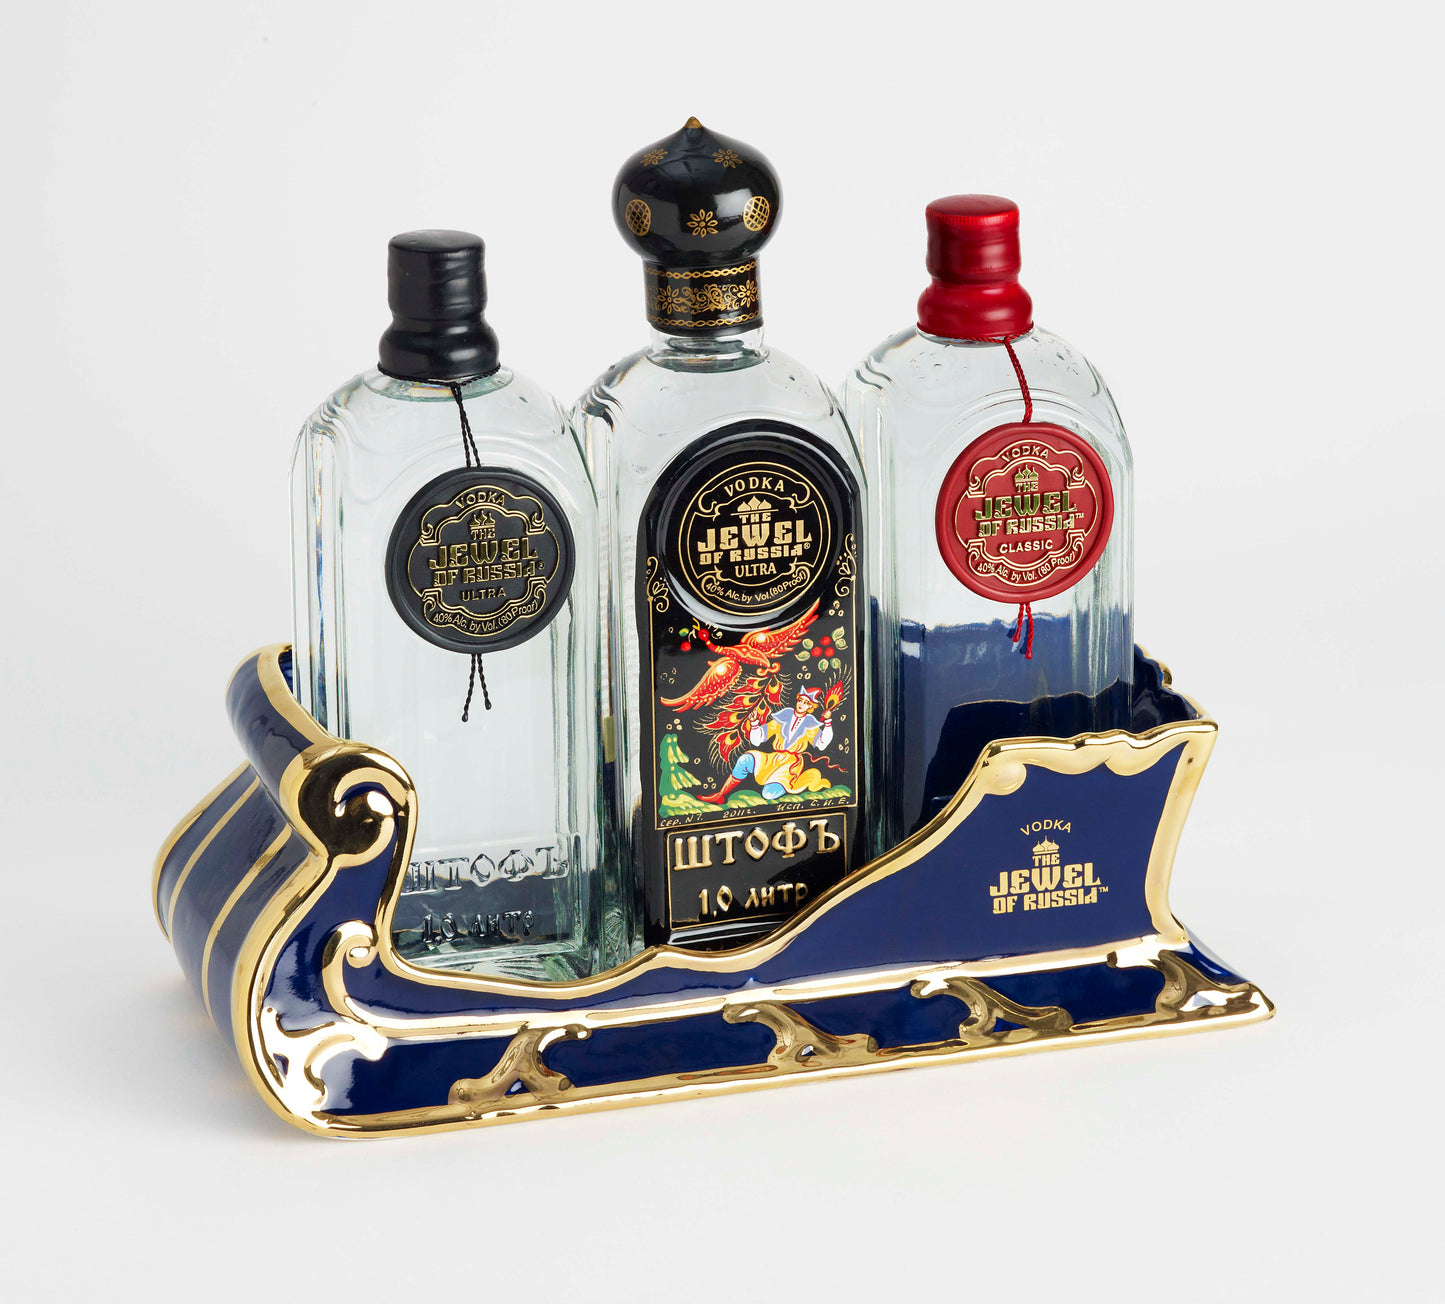 The Jewel Of Russia Vodka handmade porcelain cobalt blue sled with a true gold paint trim